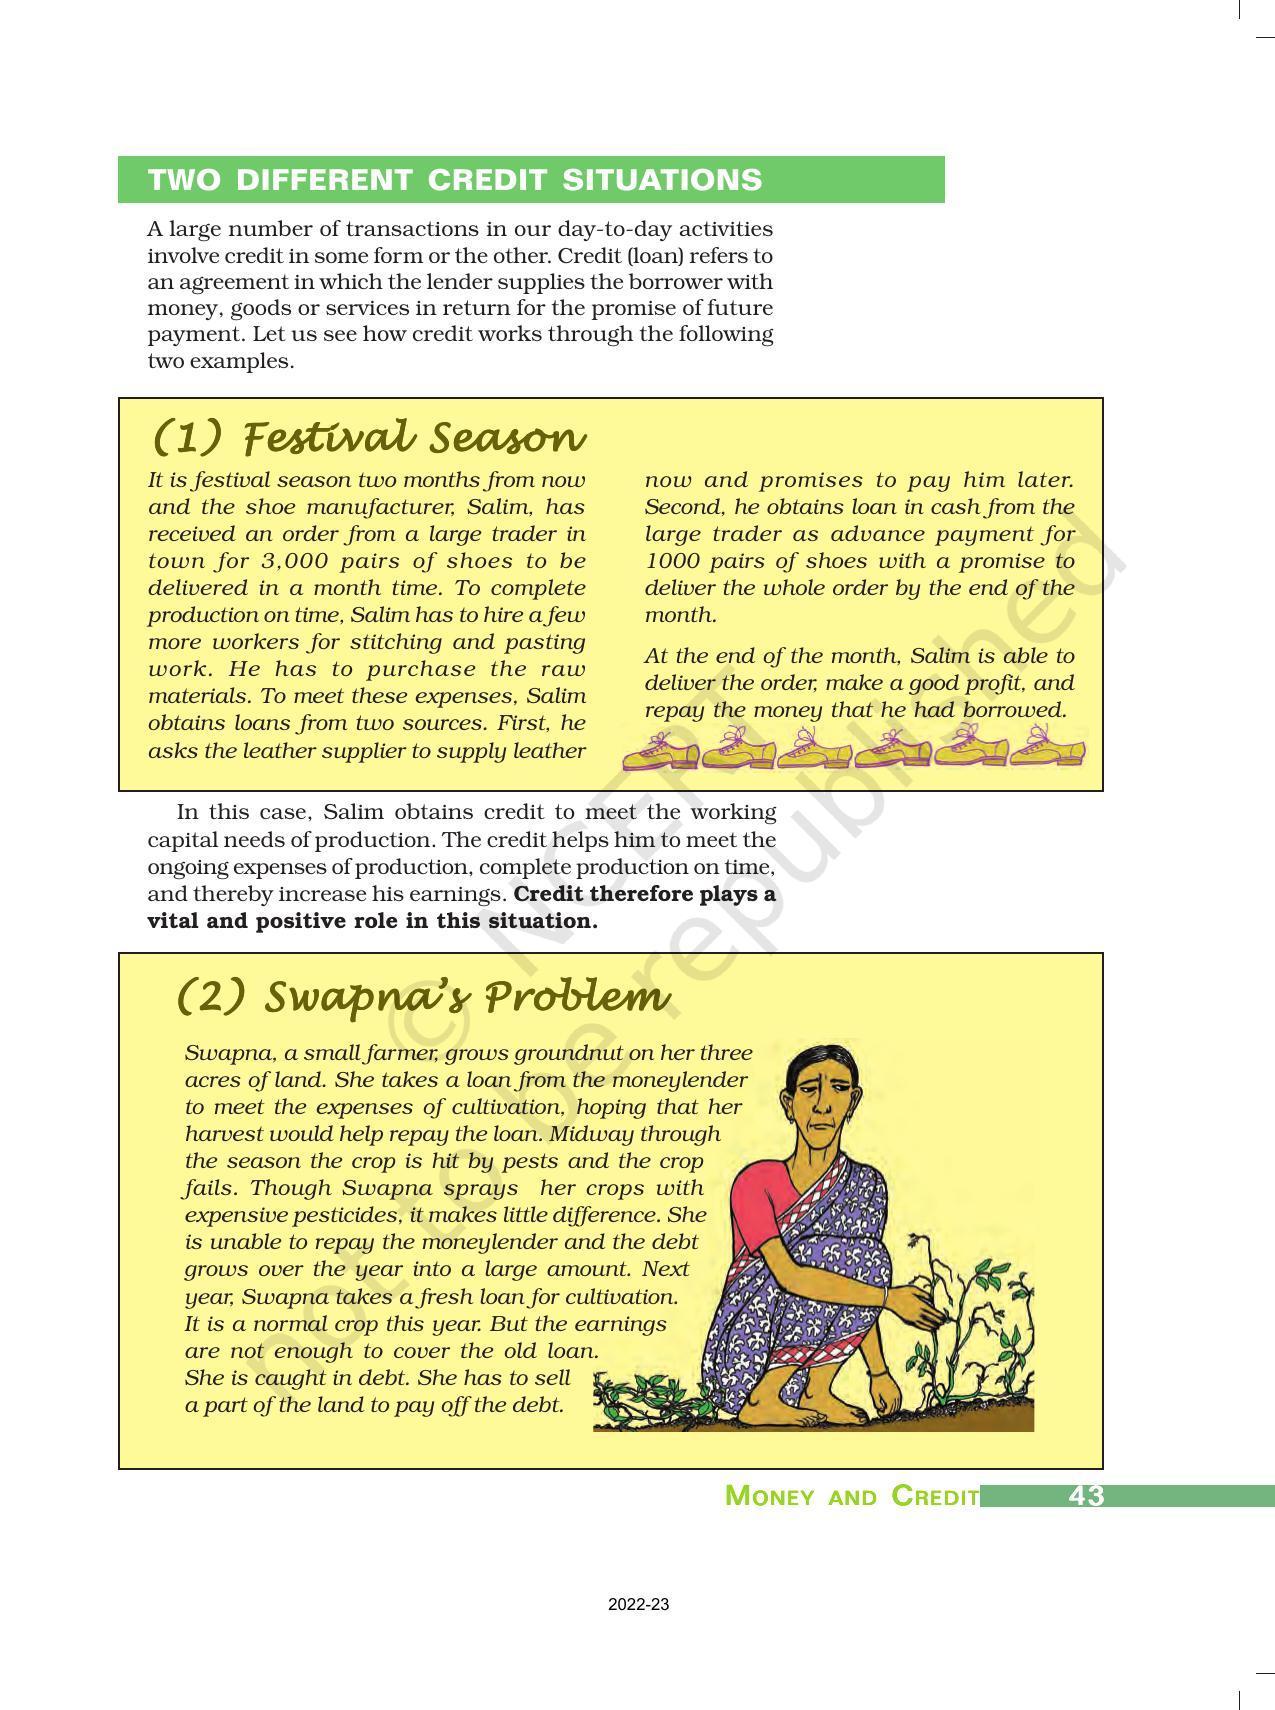 NCERT Book for Class 10 Economics Chapter 3 Money and Credit - Page 6